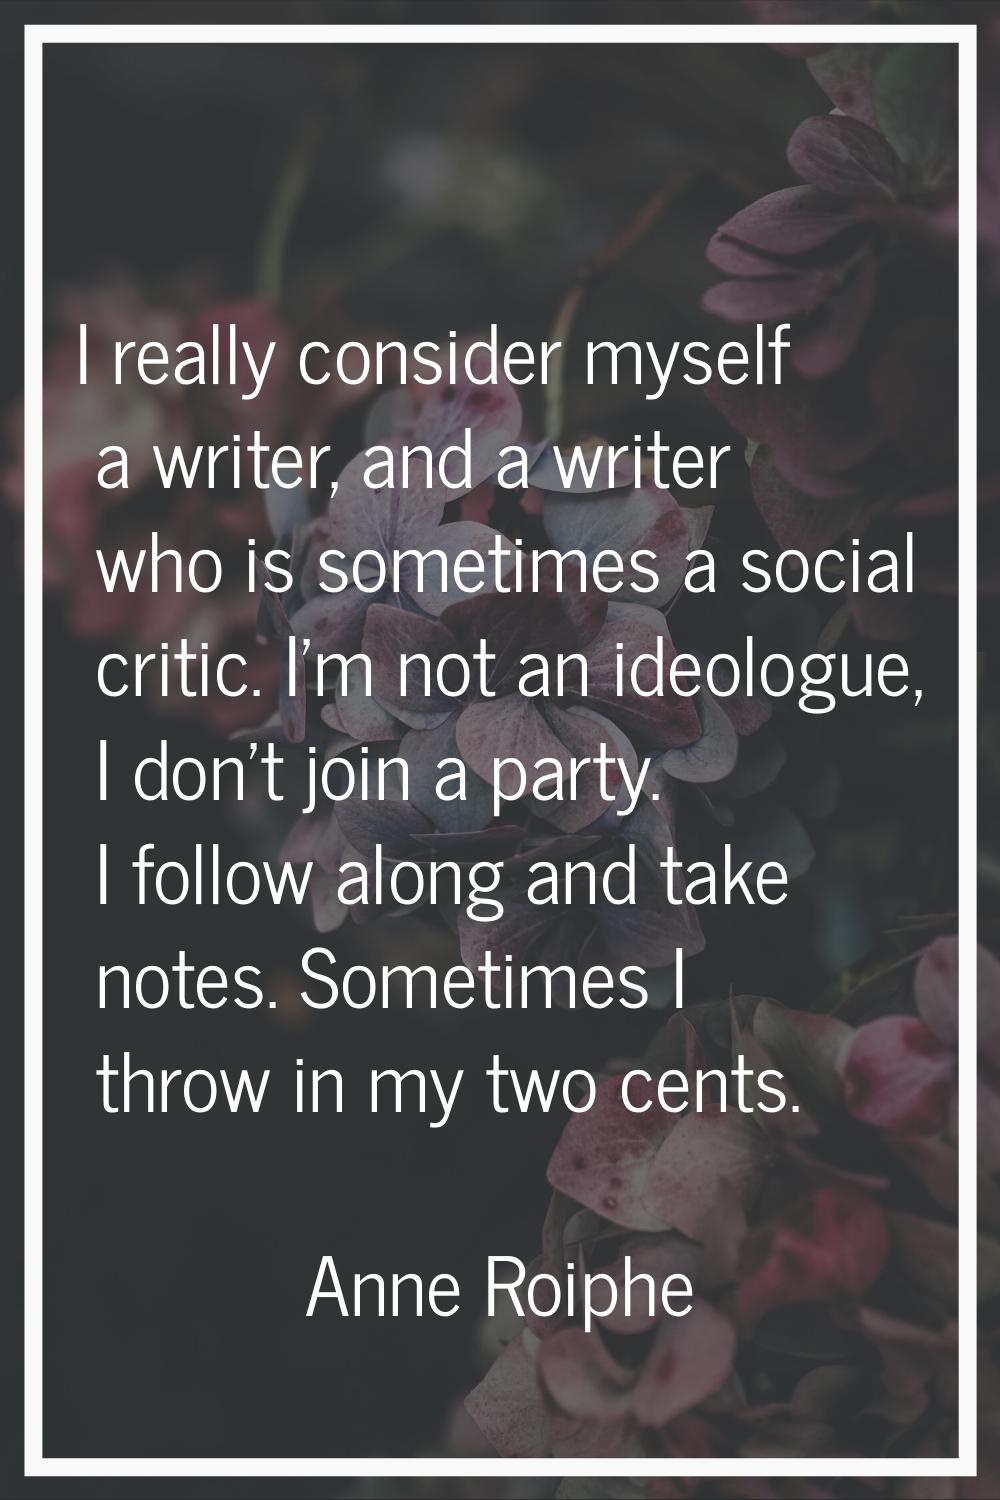 I really consider myself a writer, and a writer who is sometimes a social critic. I'm not an ideolo